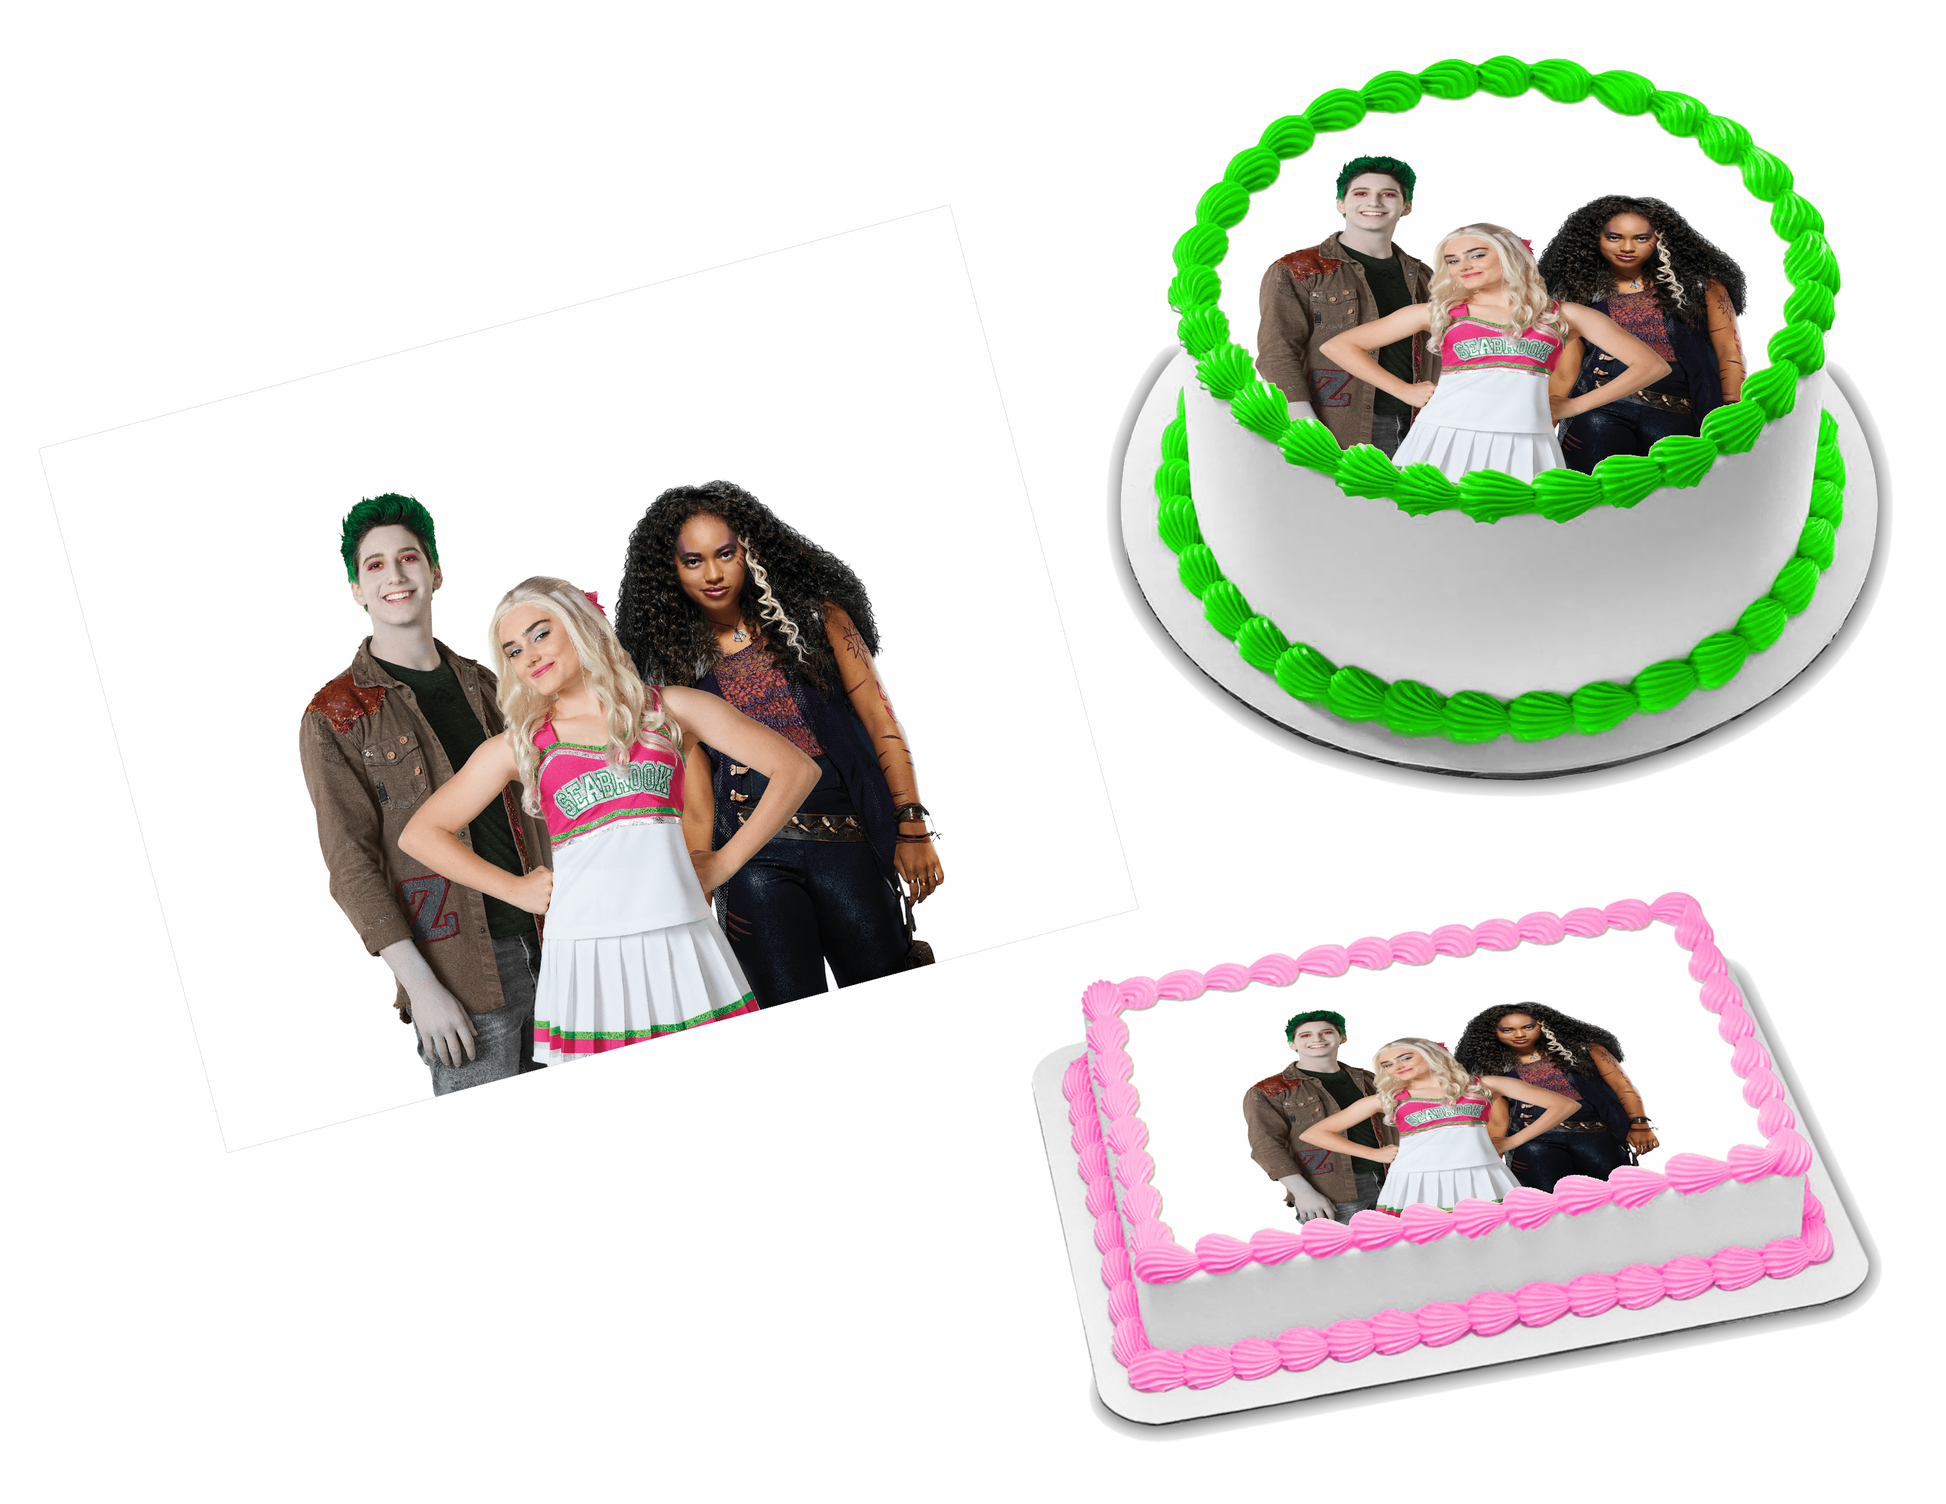 Zombies 2 Edible Image Frosting Sheet #6 (70+ sizes)